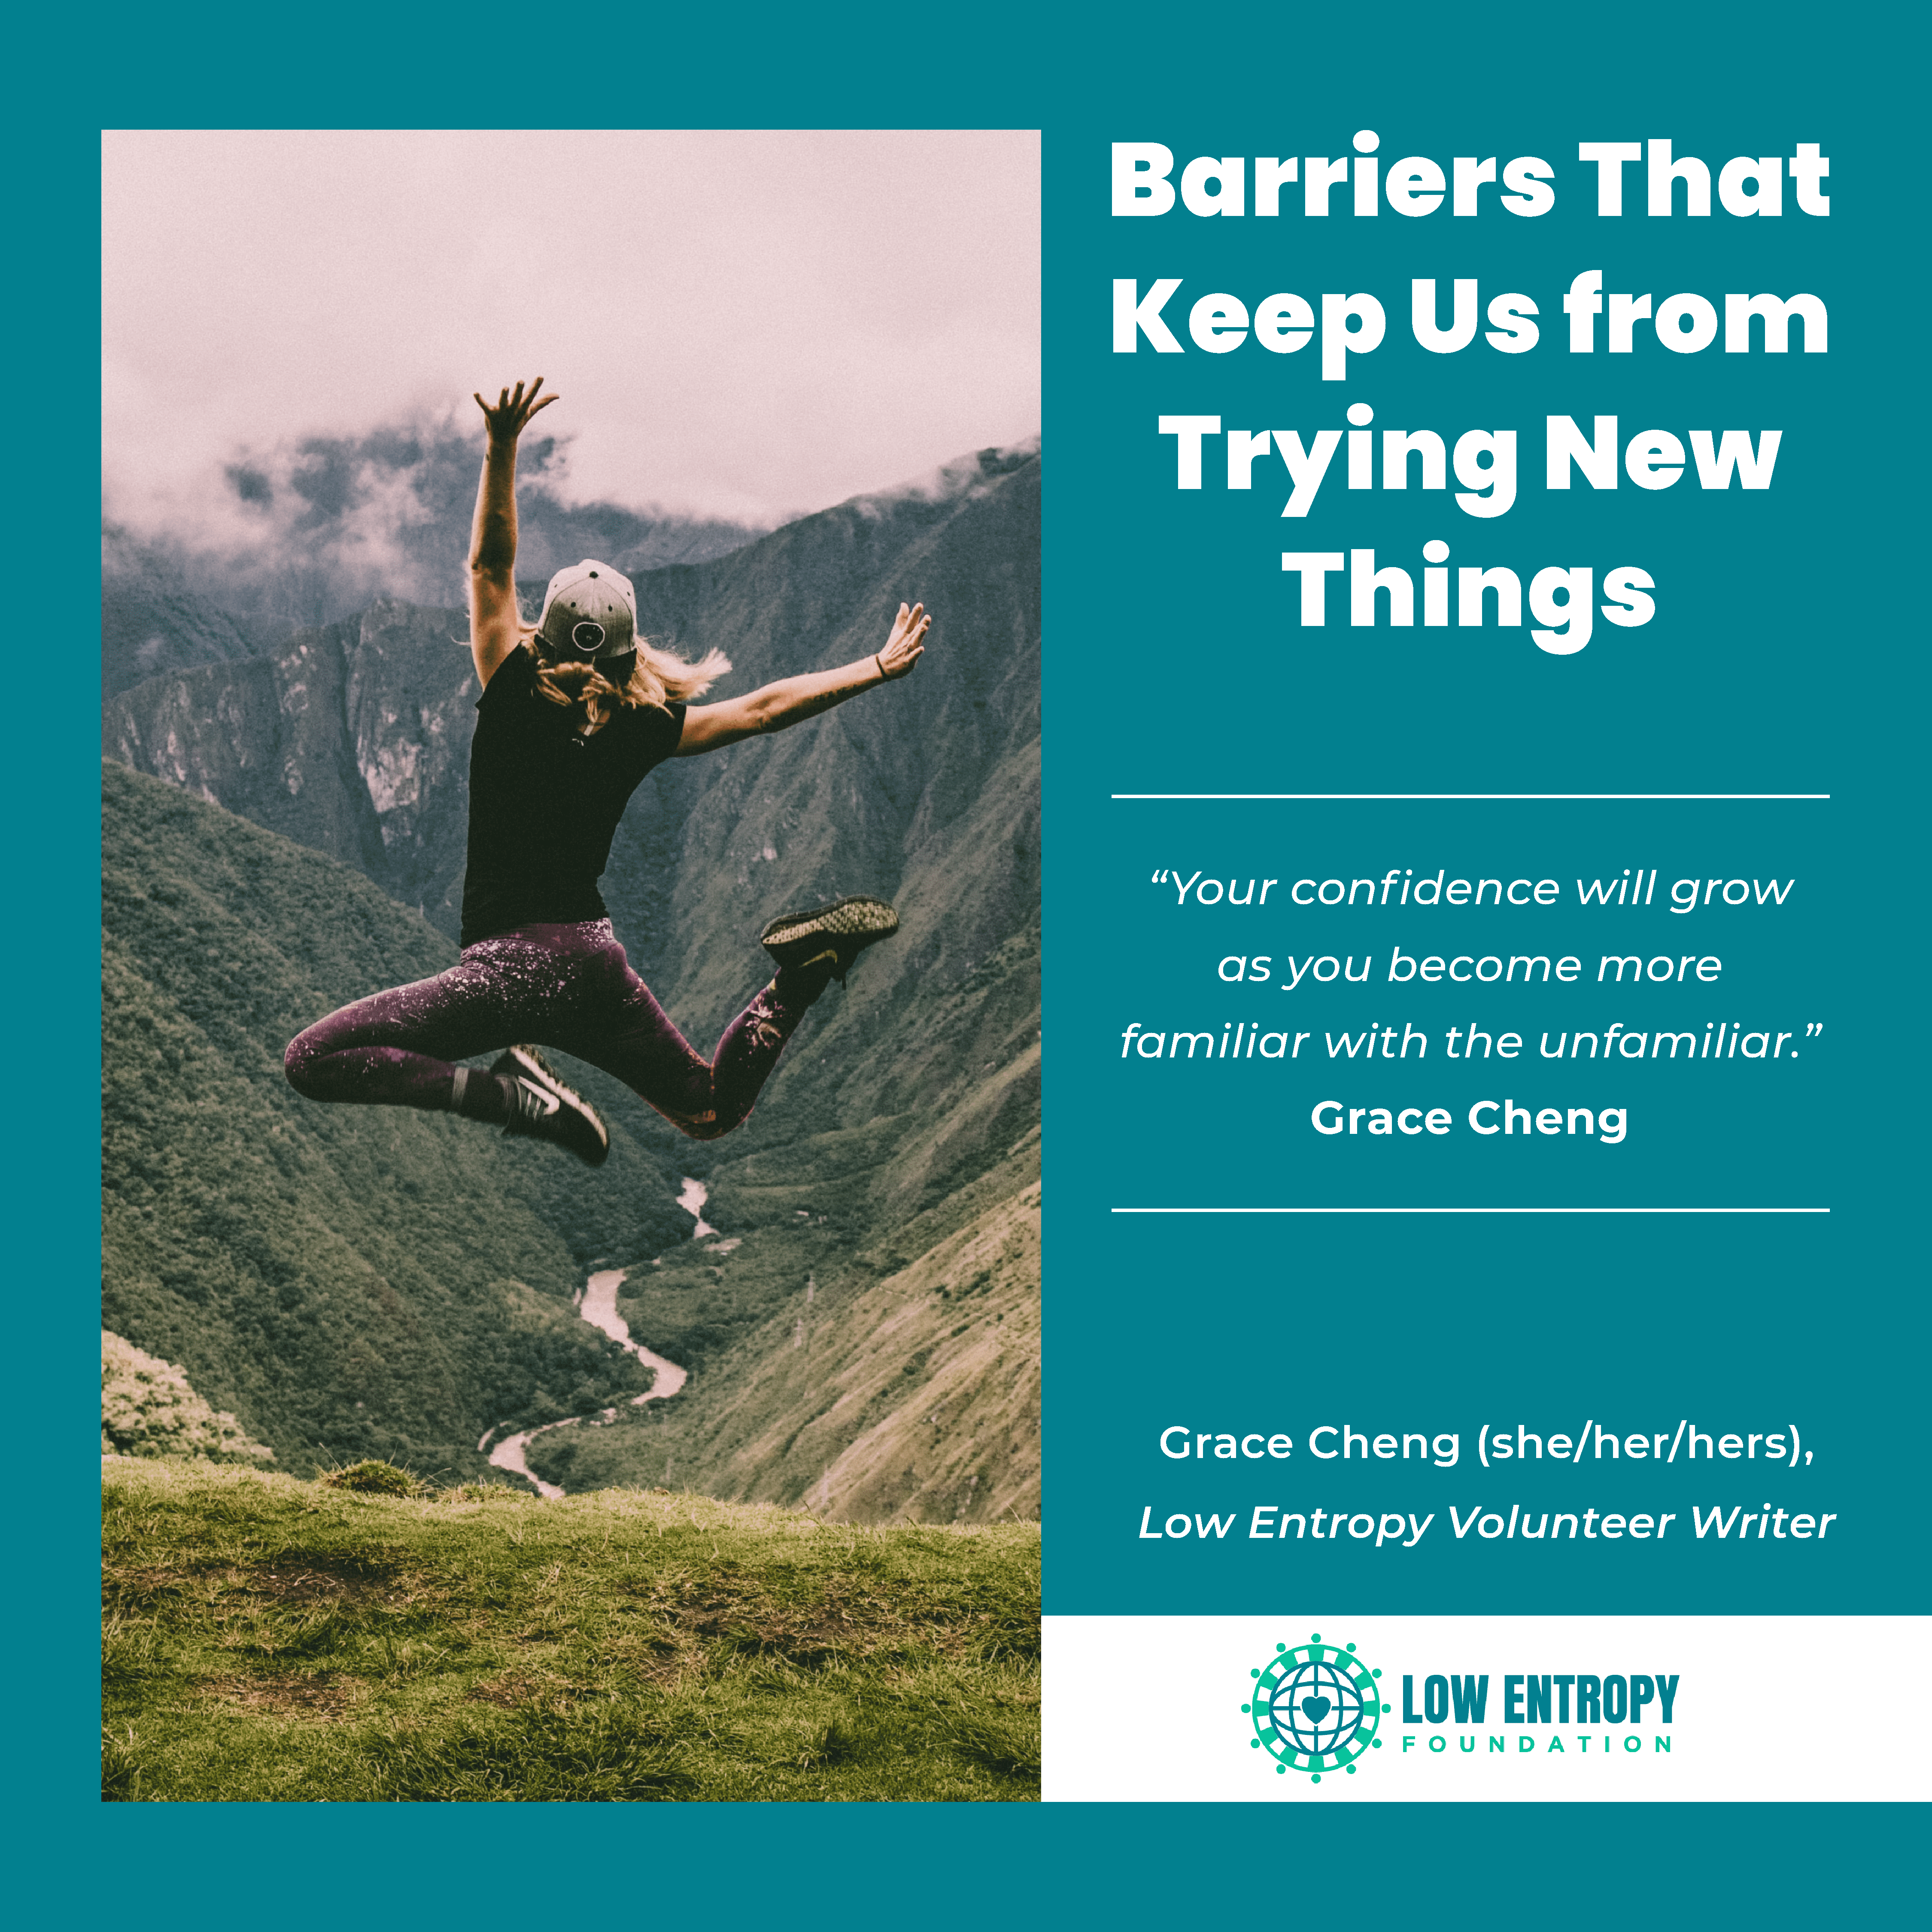 Barriers That Keep Us from Trying New Things